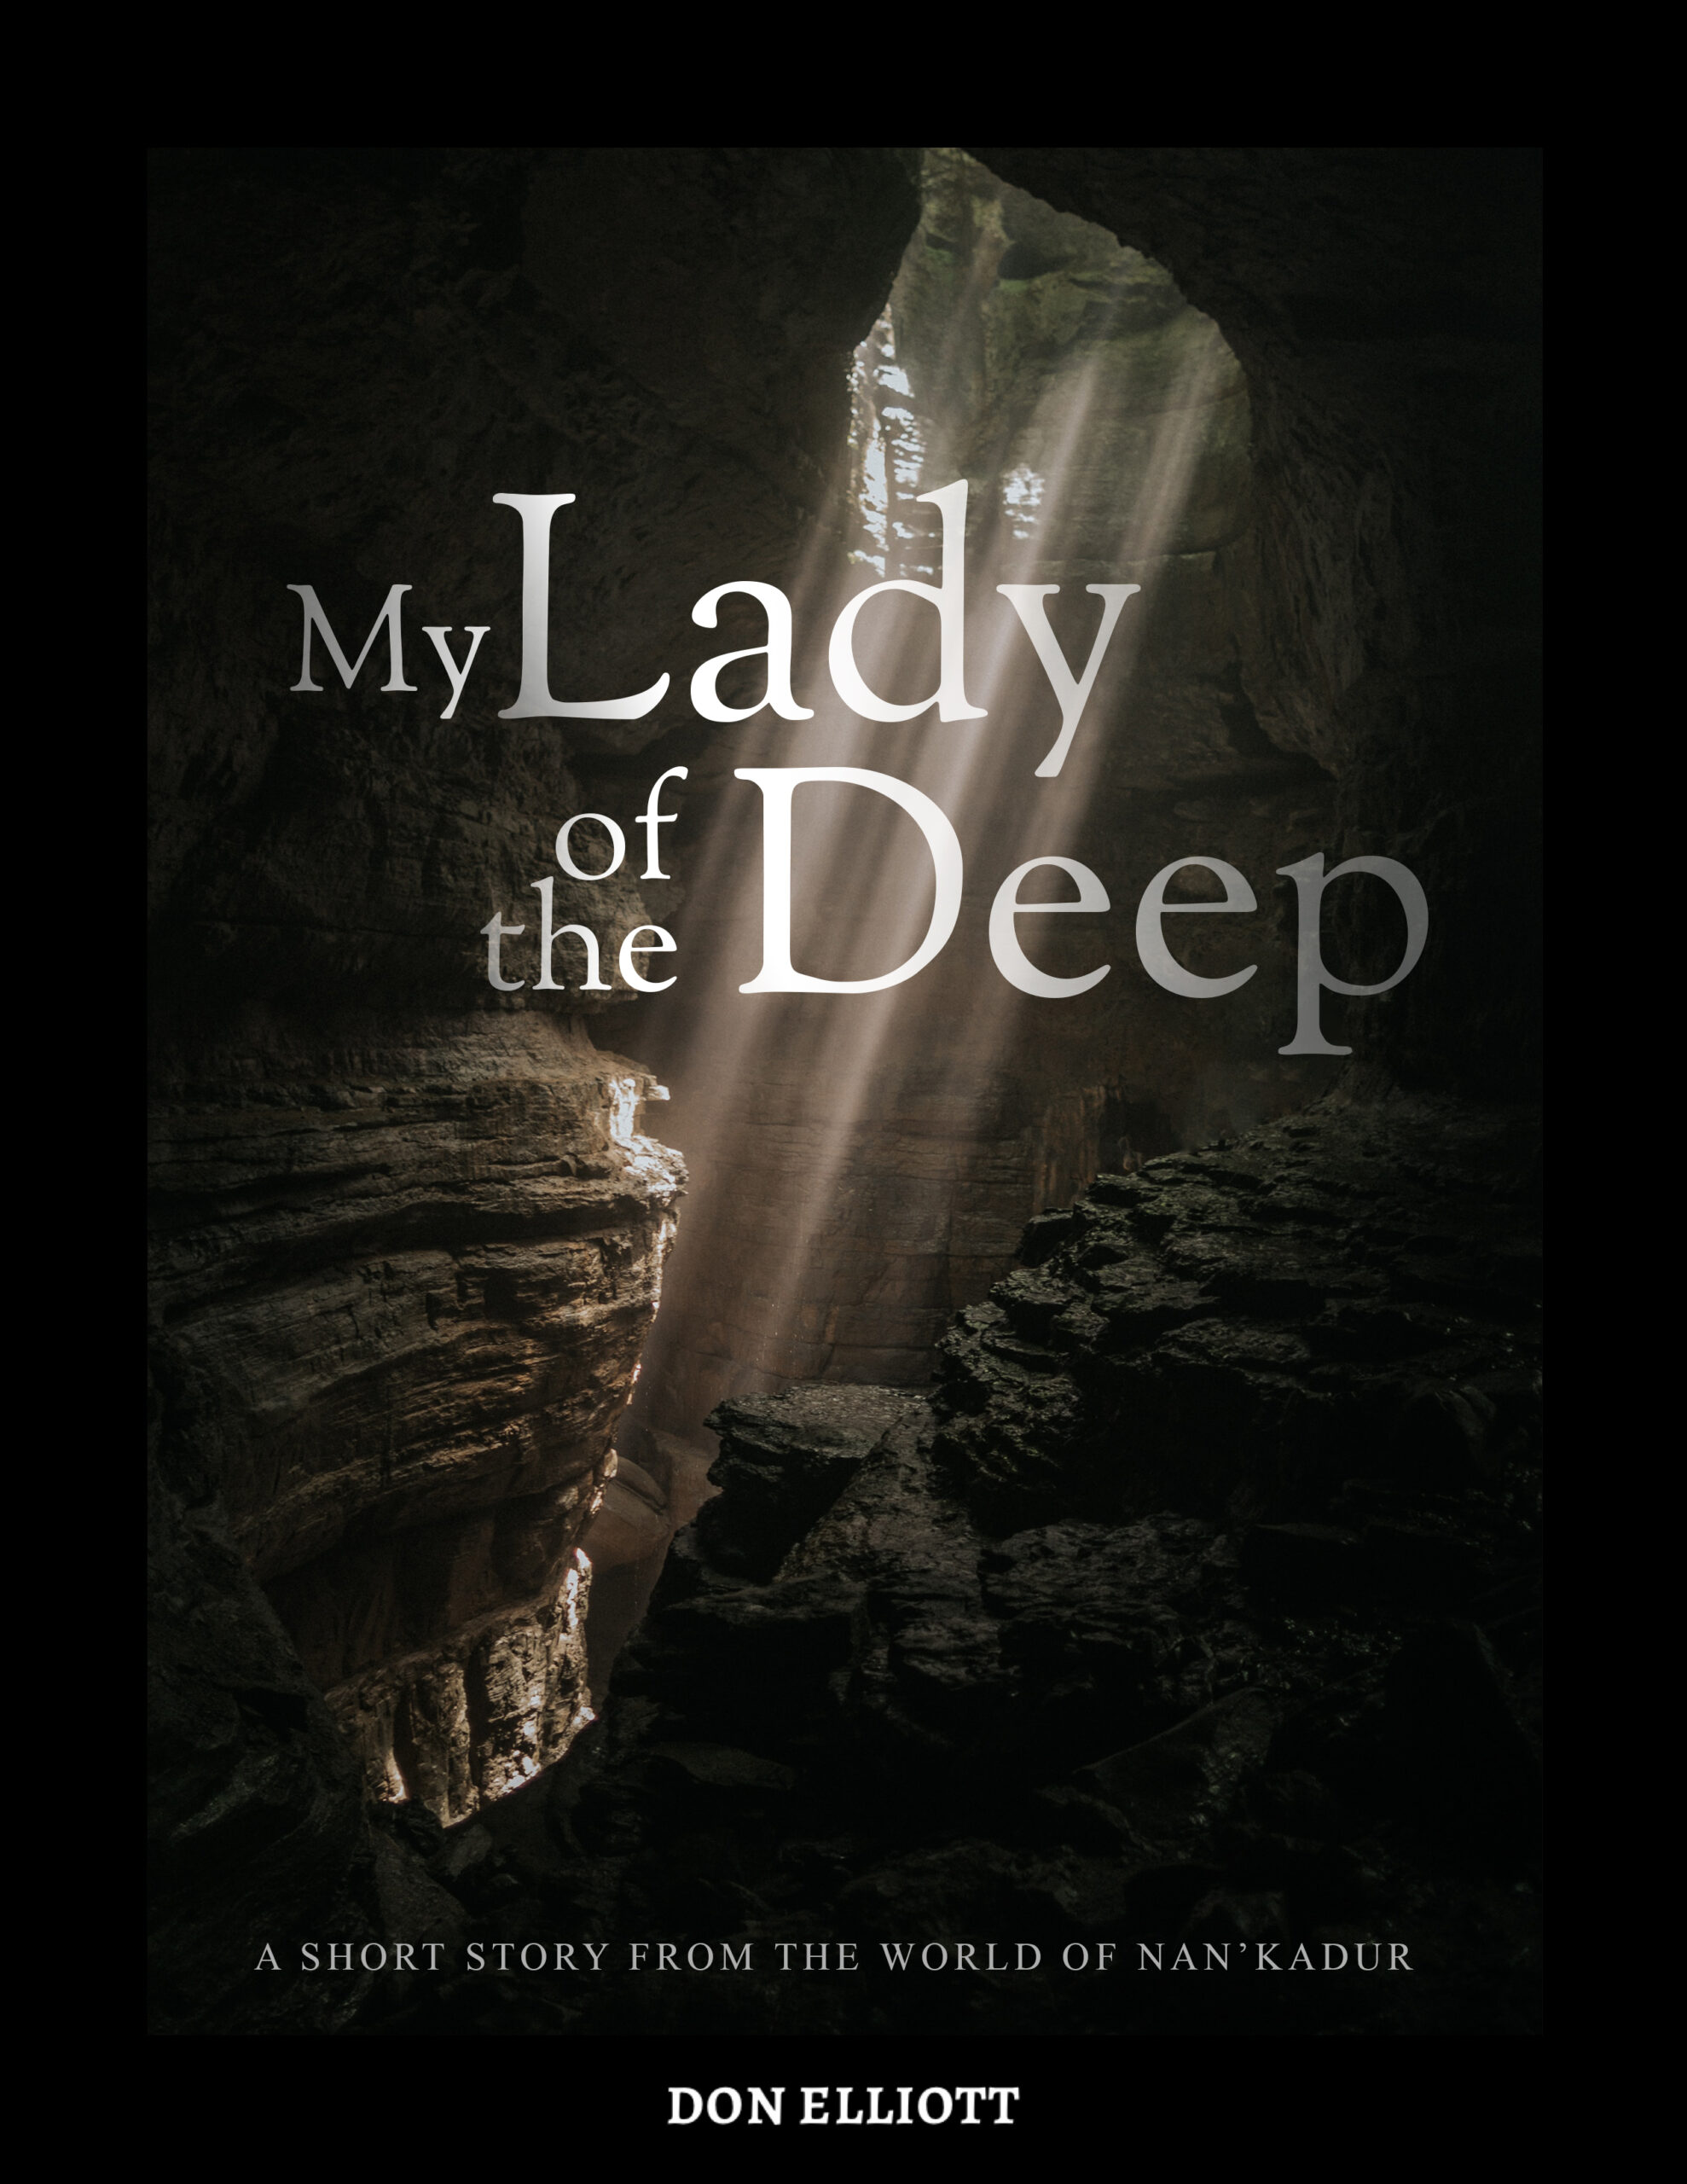 My Lady of the Deep - A Short Story - Cover Art